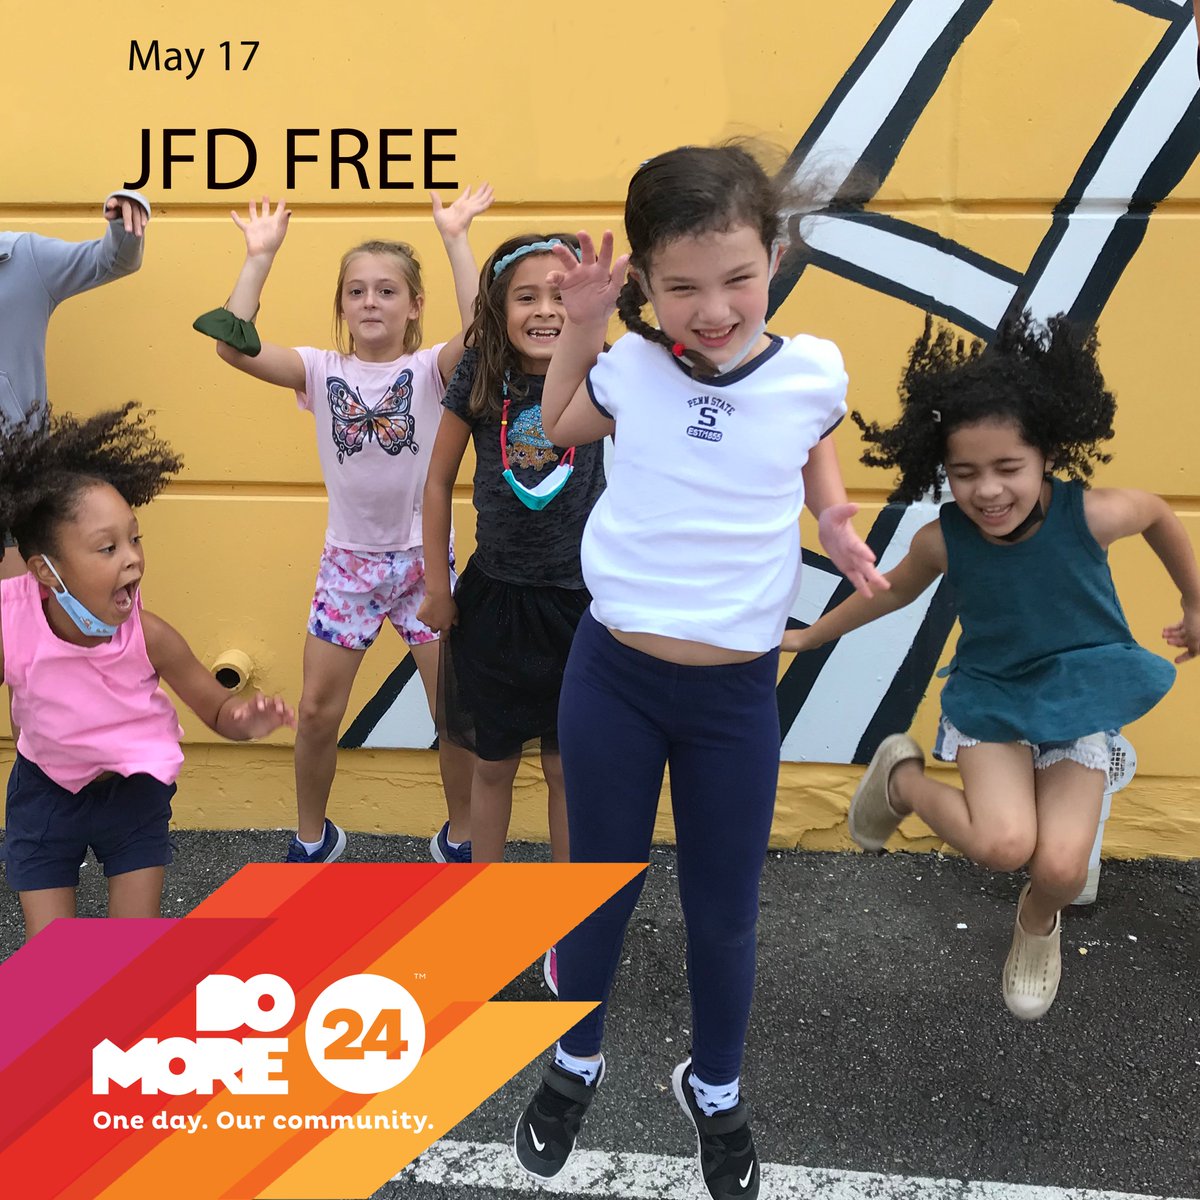 May 17 Do More 24 - Support FREE performances, classes, intergenerational projects and summer camp scholarships
domore24.org/JFD

#arlingtondanceclass #performingarts #kidsclasses #FREE #moveyourbody #summercamp2023 #kids #fun